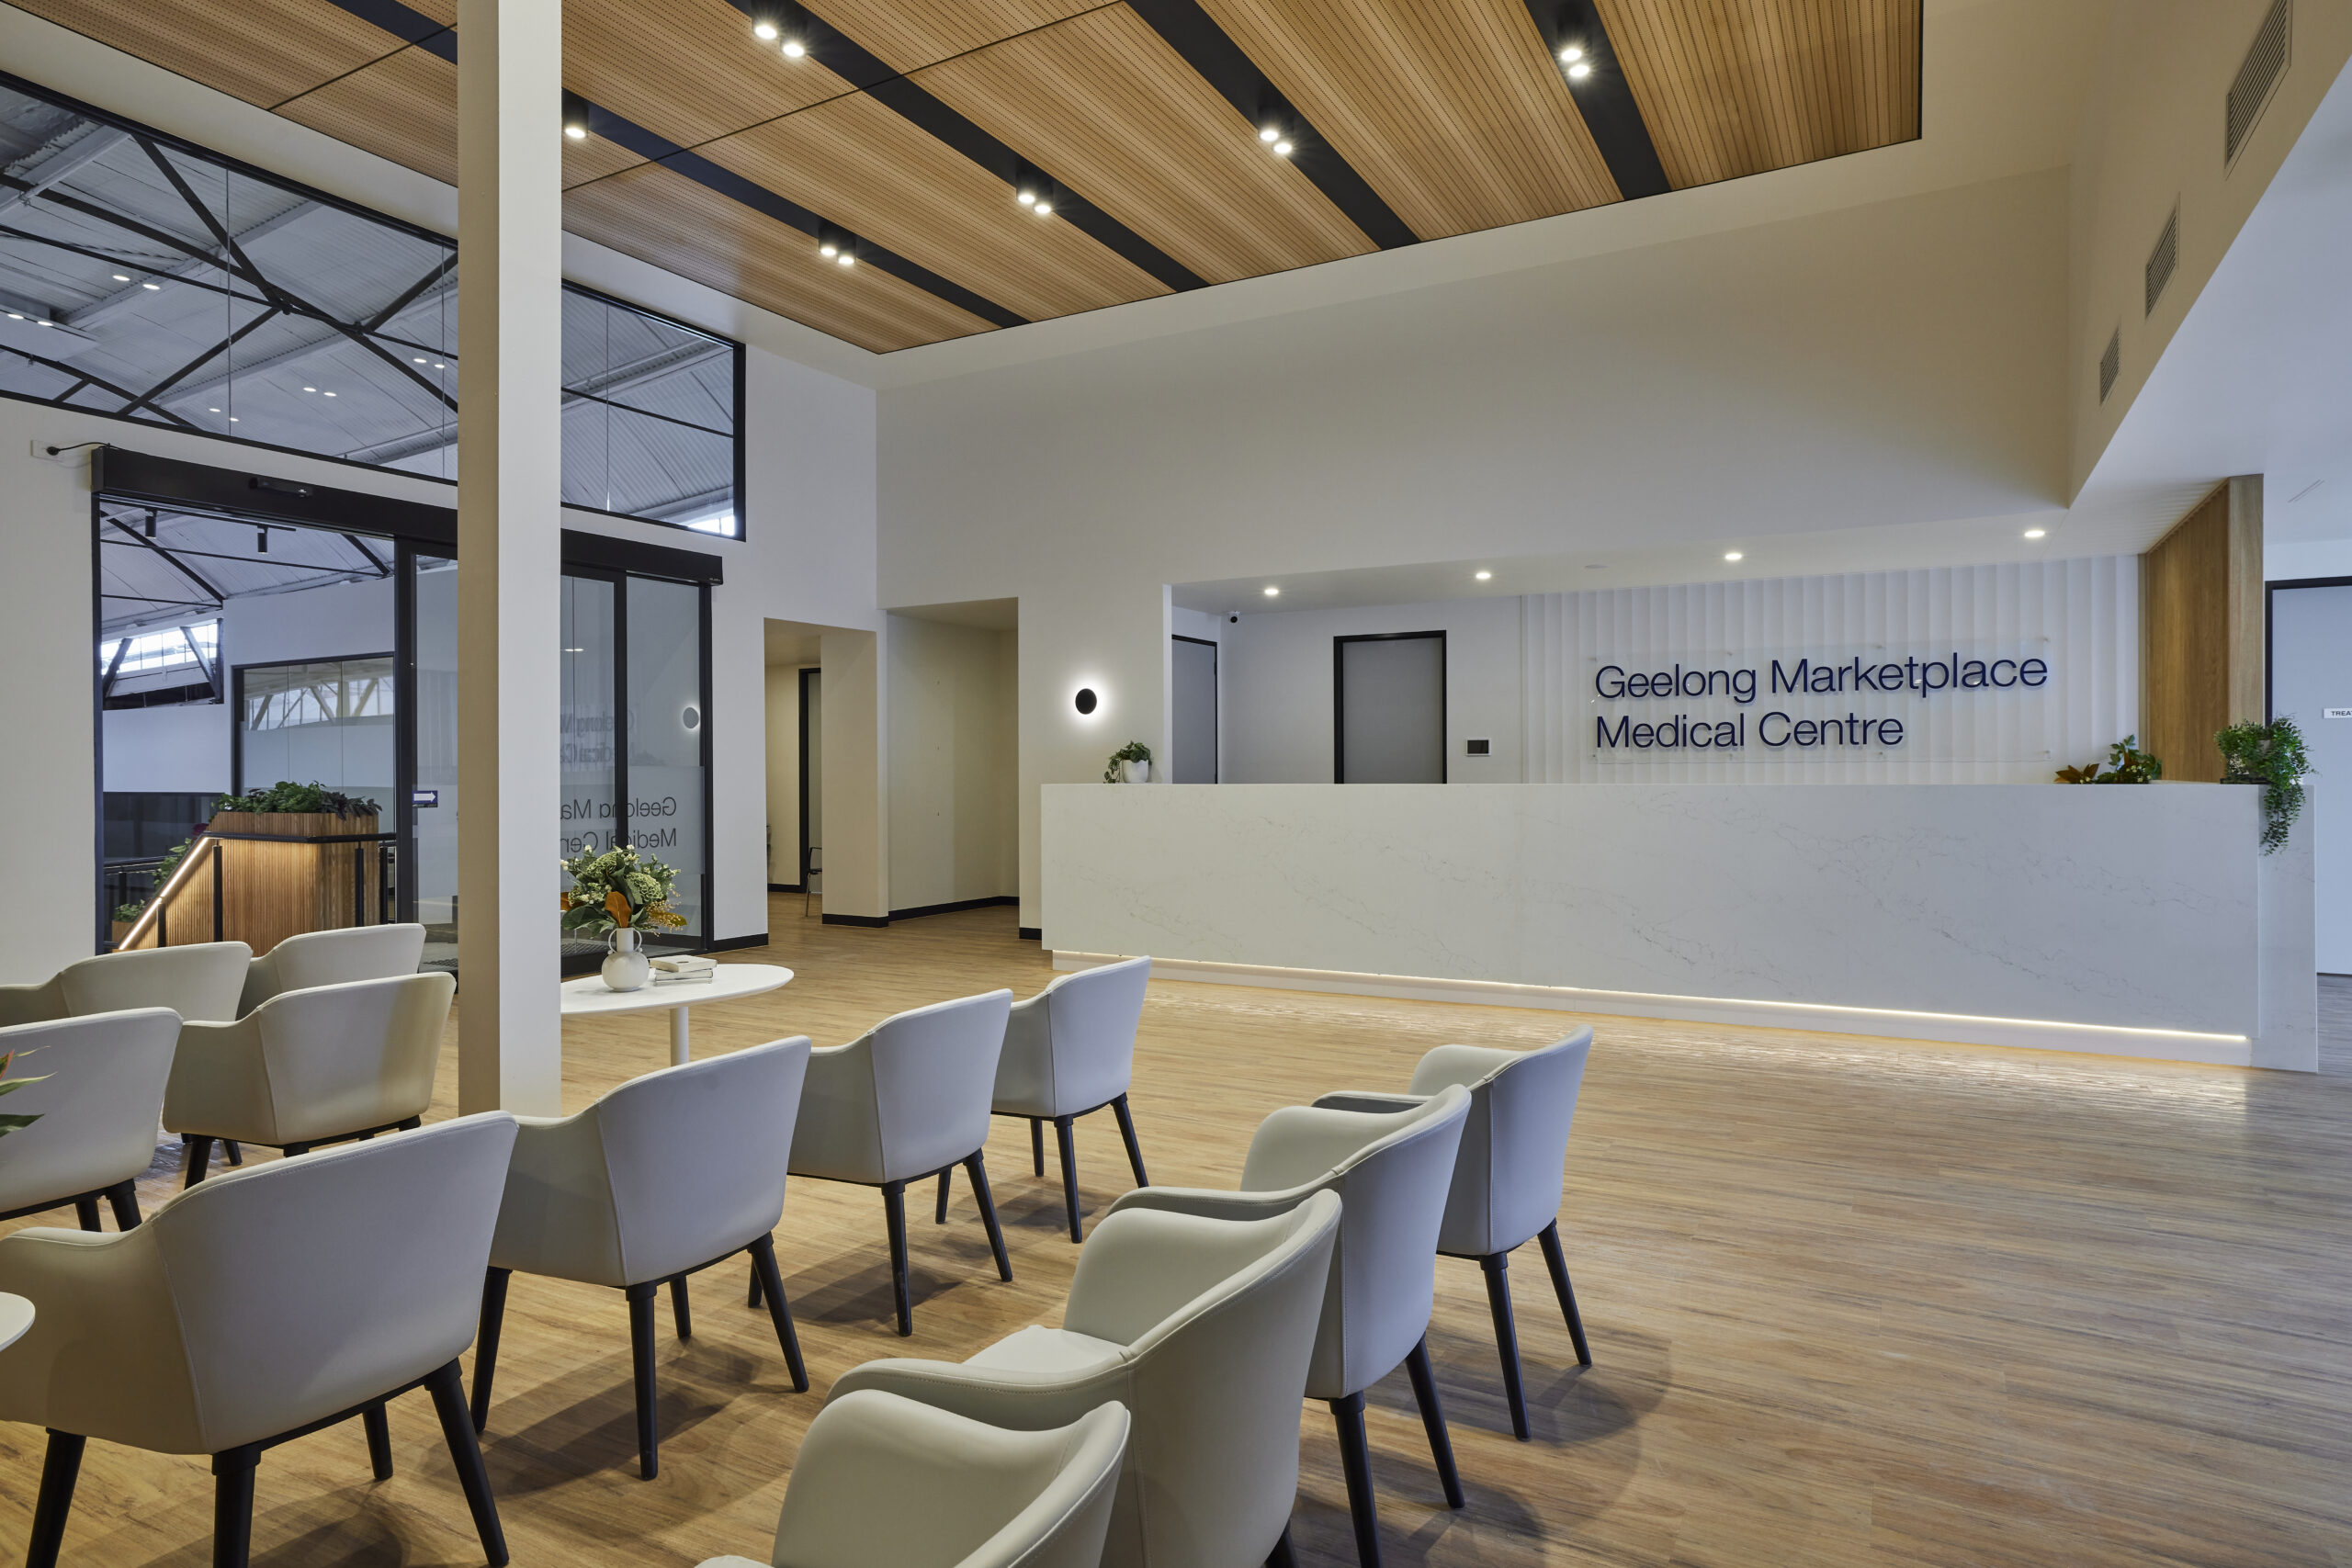 Geelong Marketplace Medical Centre - Waiting Room 002